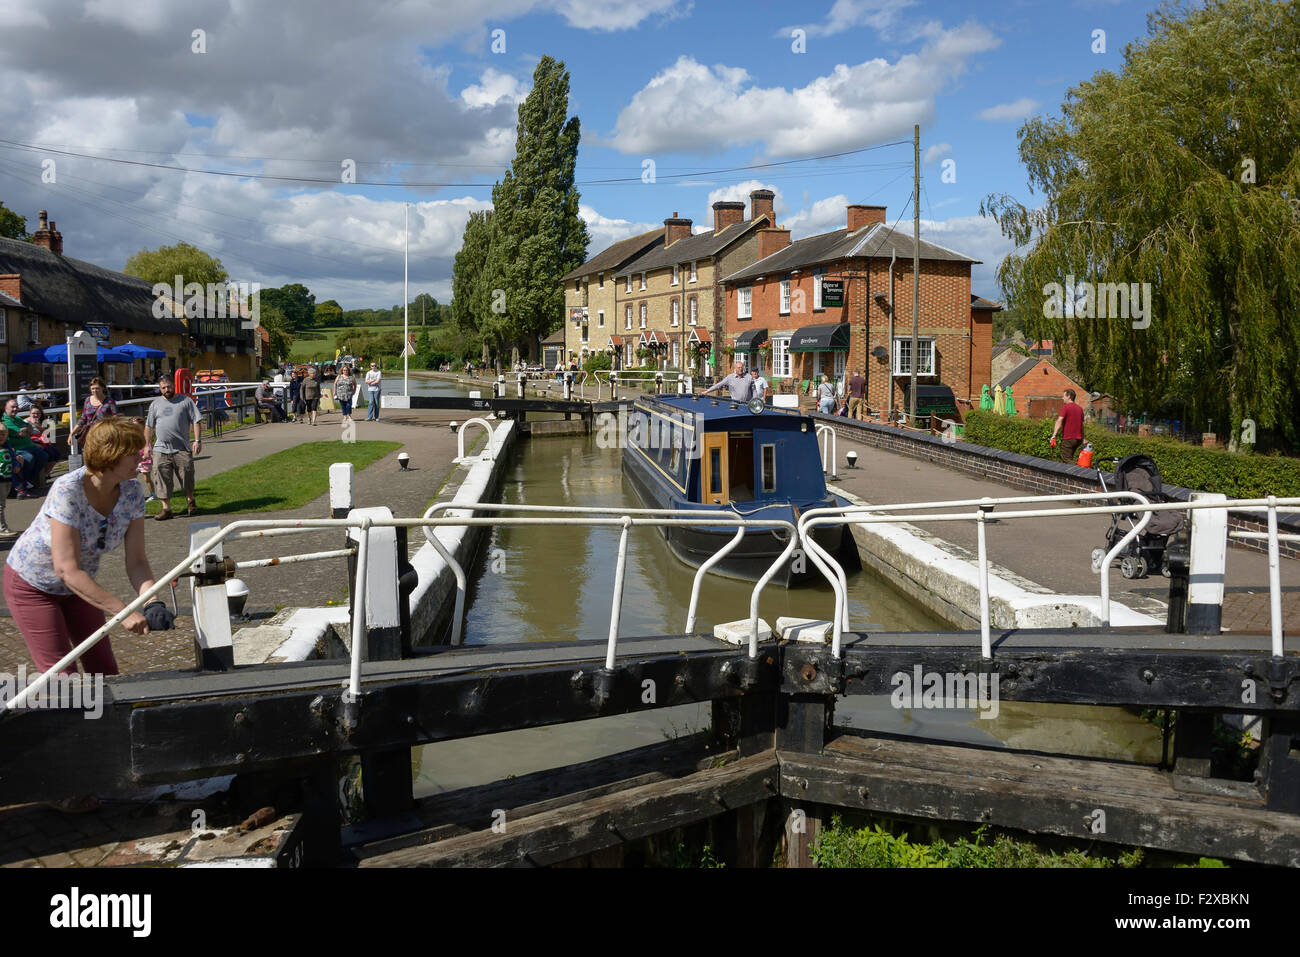 Canal boat in the top lock of the Stoke Bruerne flight, Stoke Bruerne, Northamptonshire, England, United Kingdom Stock Photo